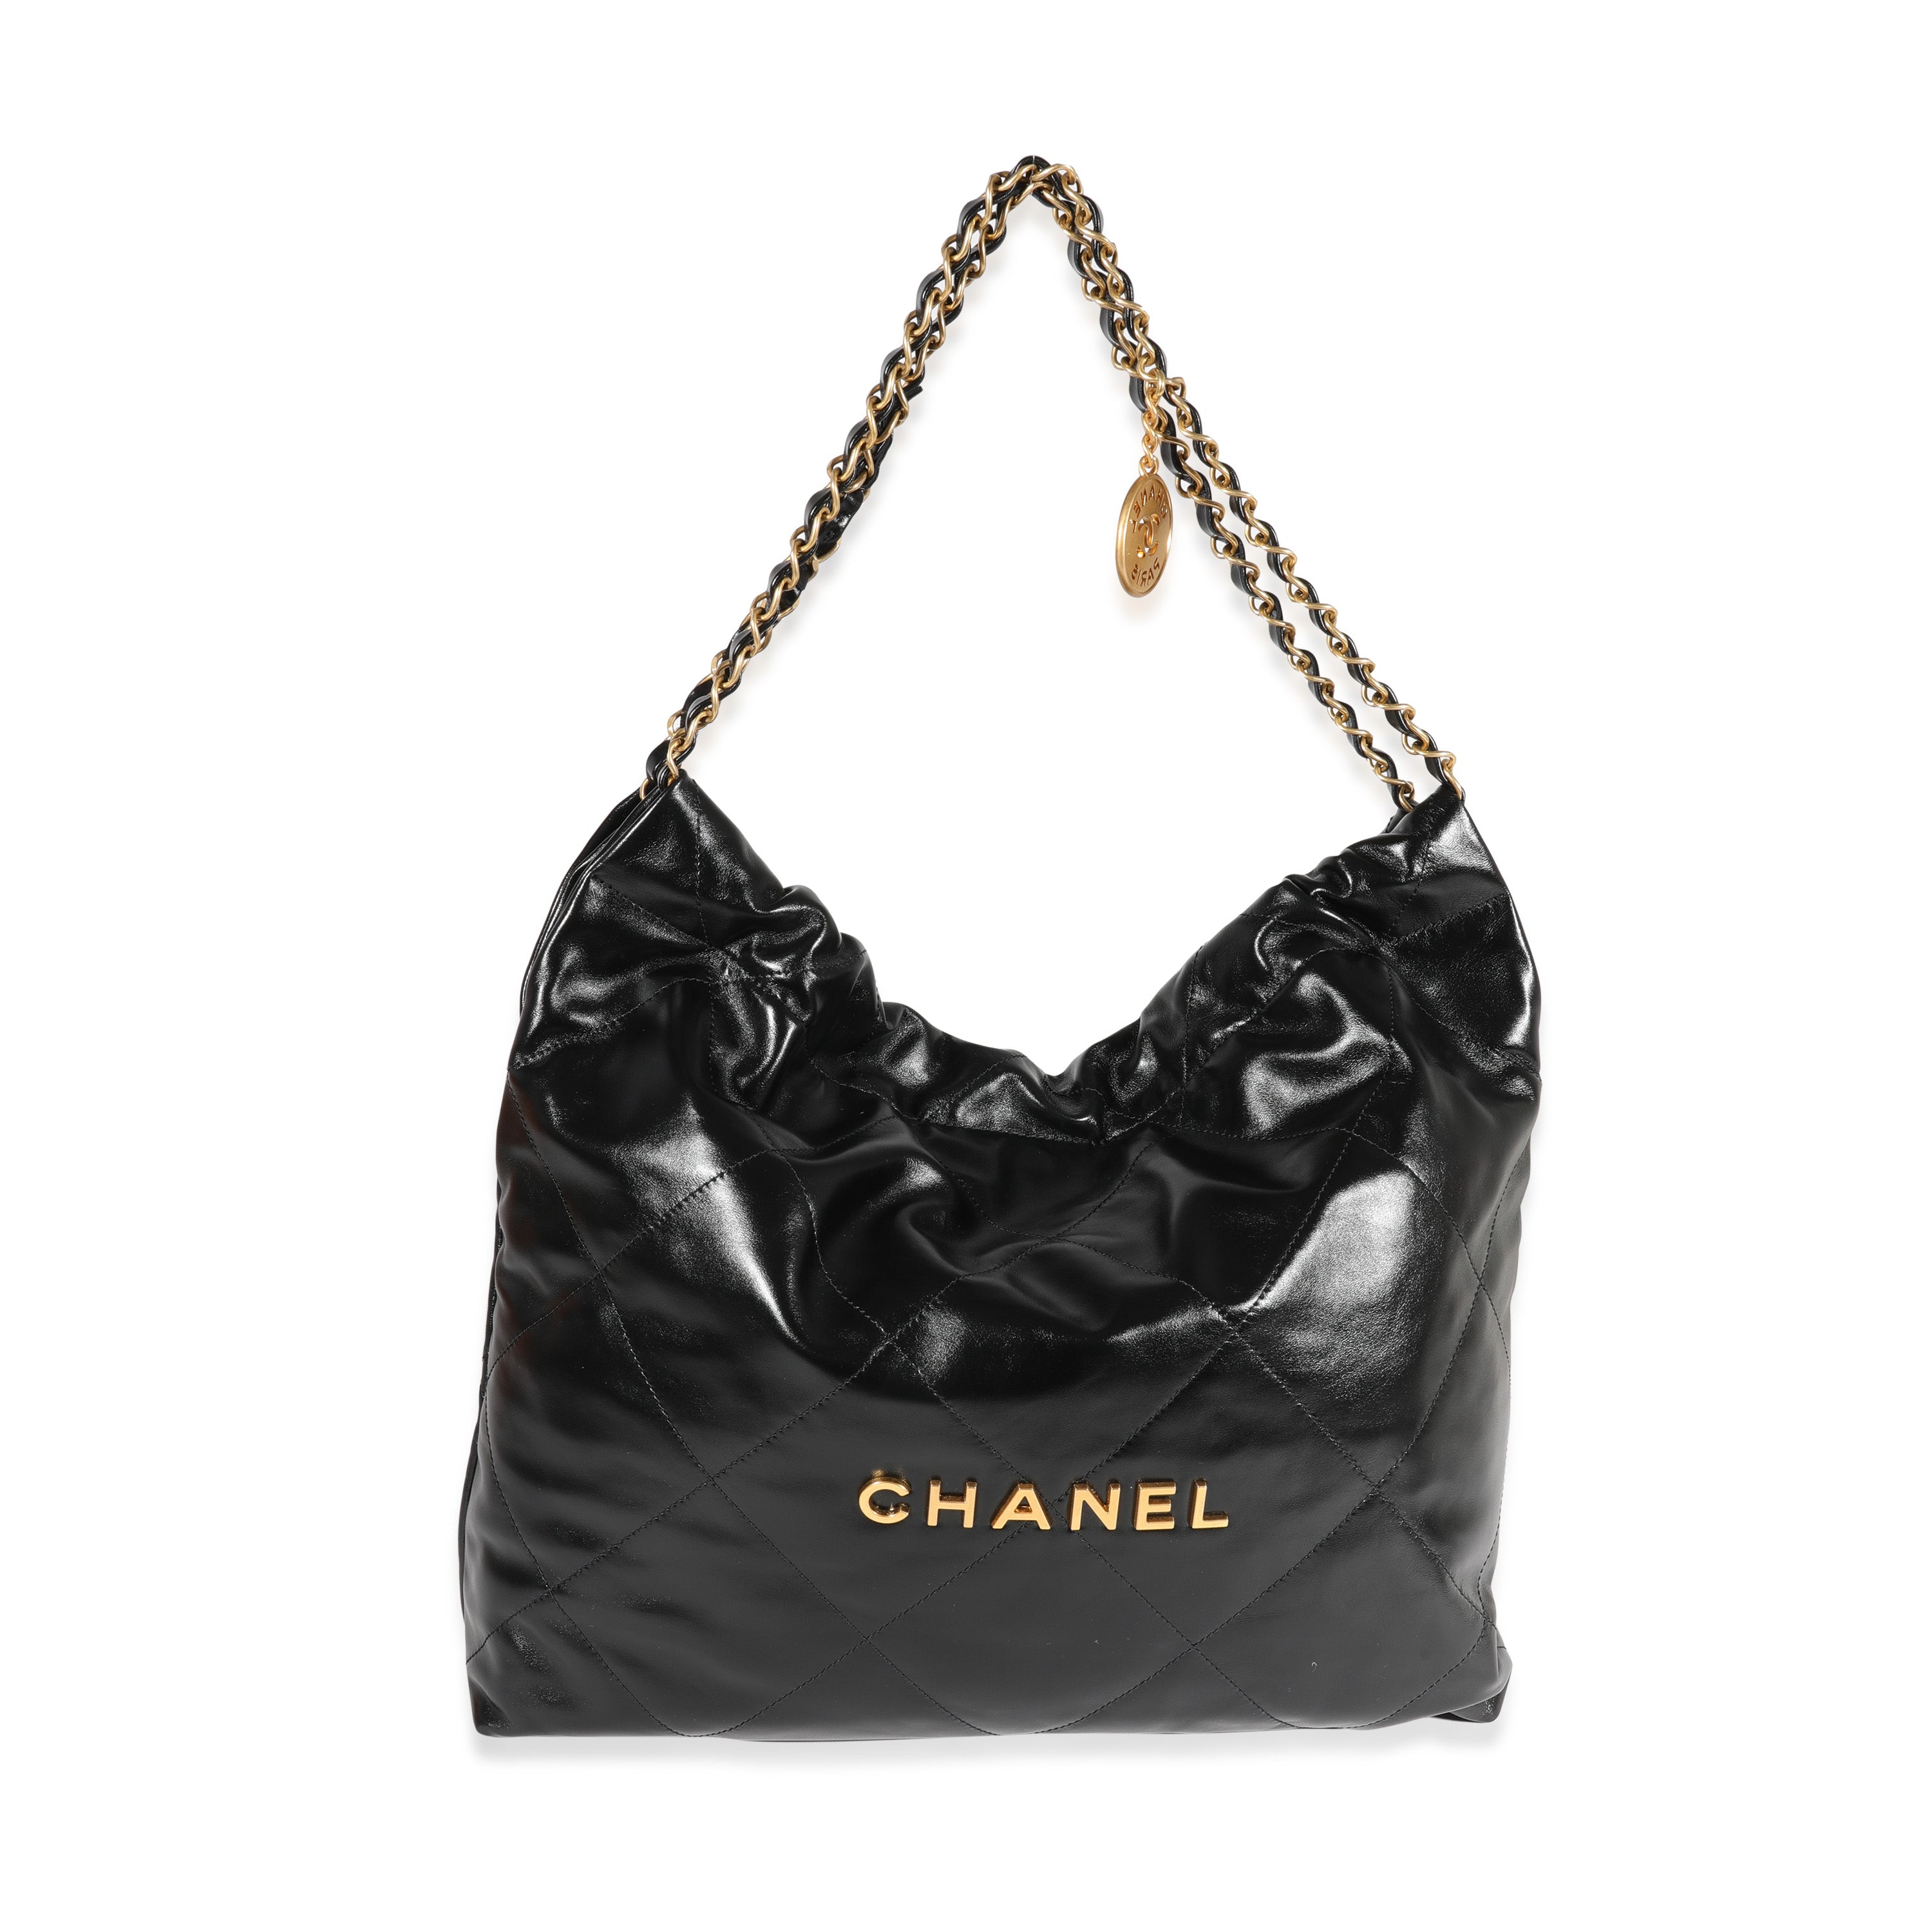 Chanel 22 leather mini bag Chanel Black in Leather - 33275015